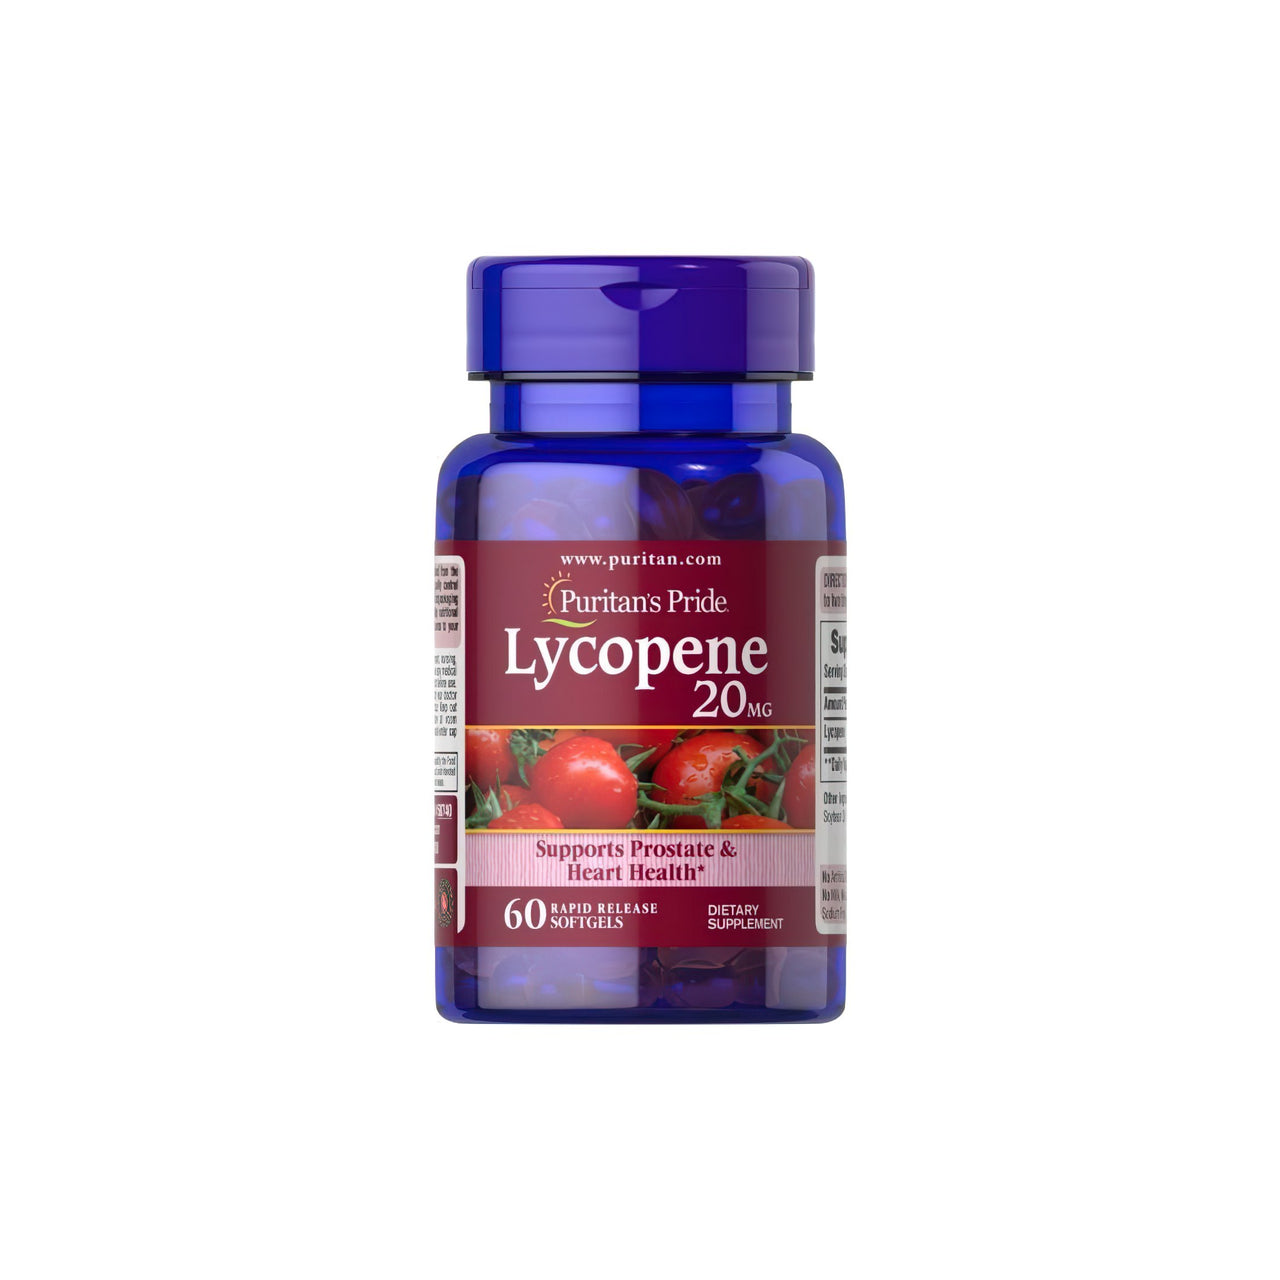 A bottle of Lycopene 20 mg 60 Rapid Release Softgels with tomatoes from Puritan's Pride.